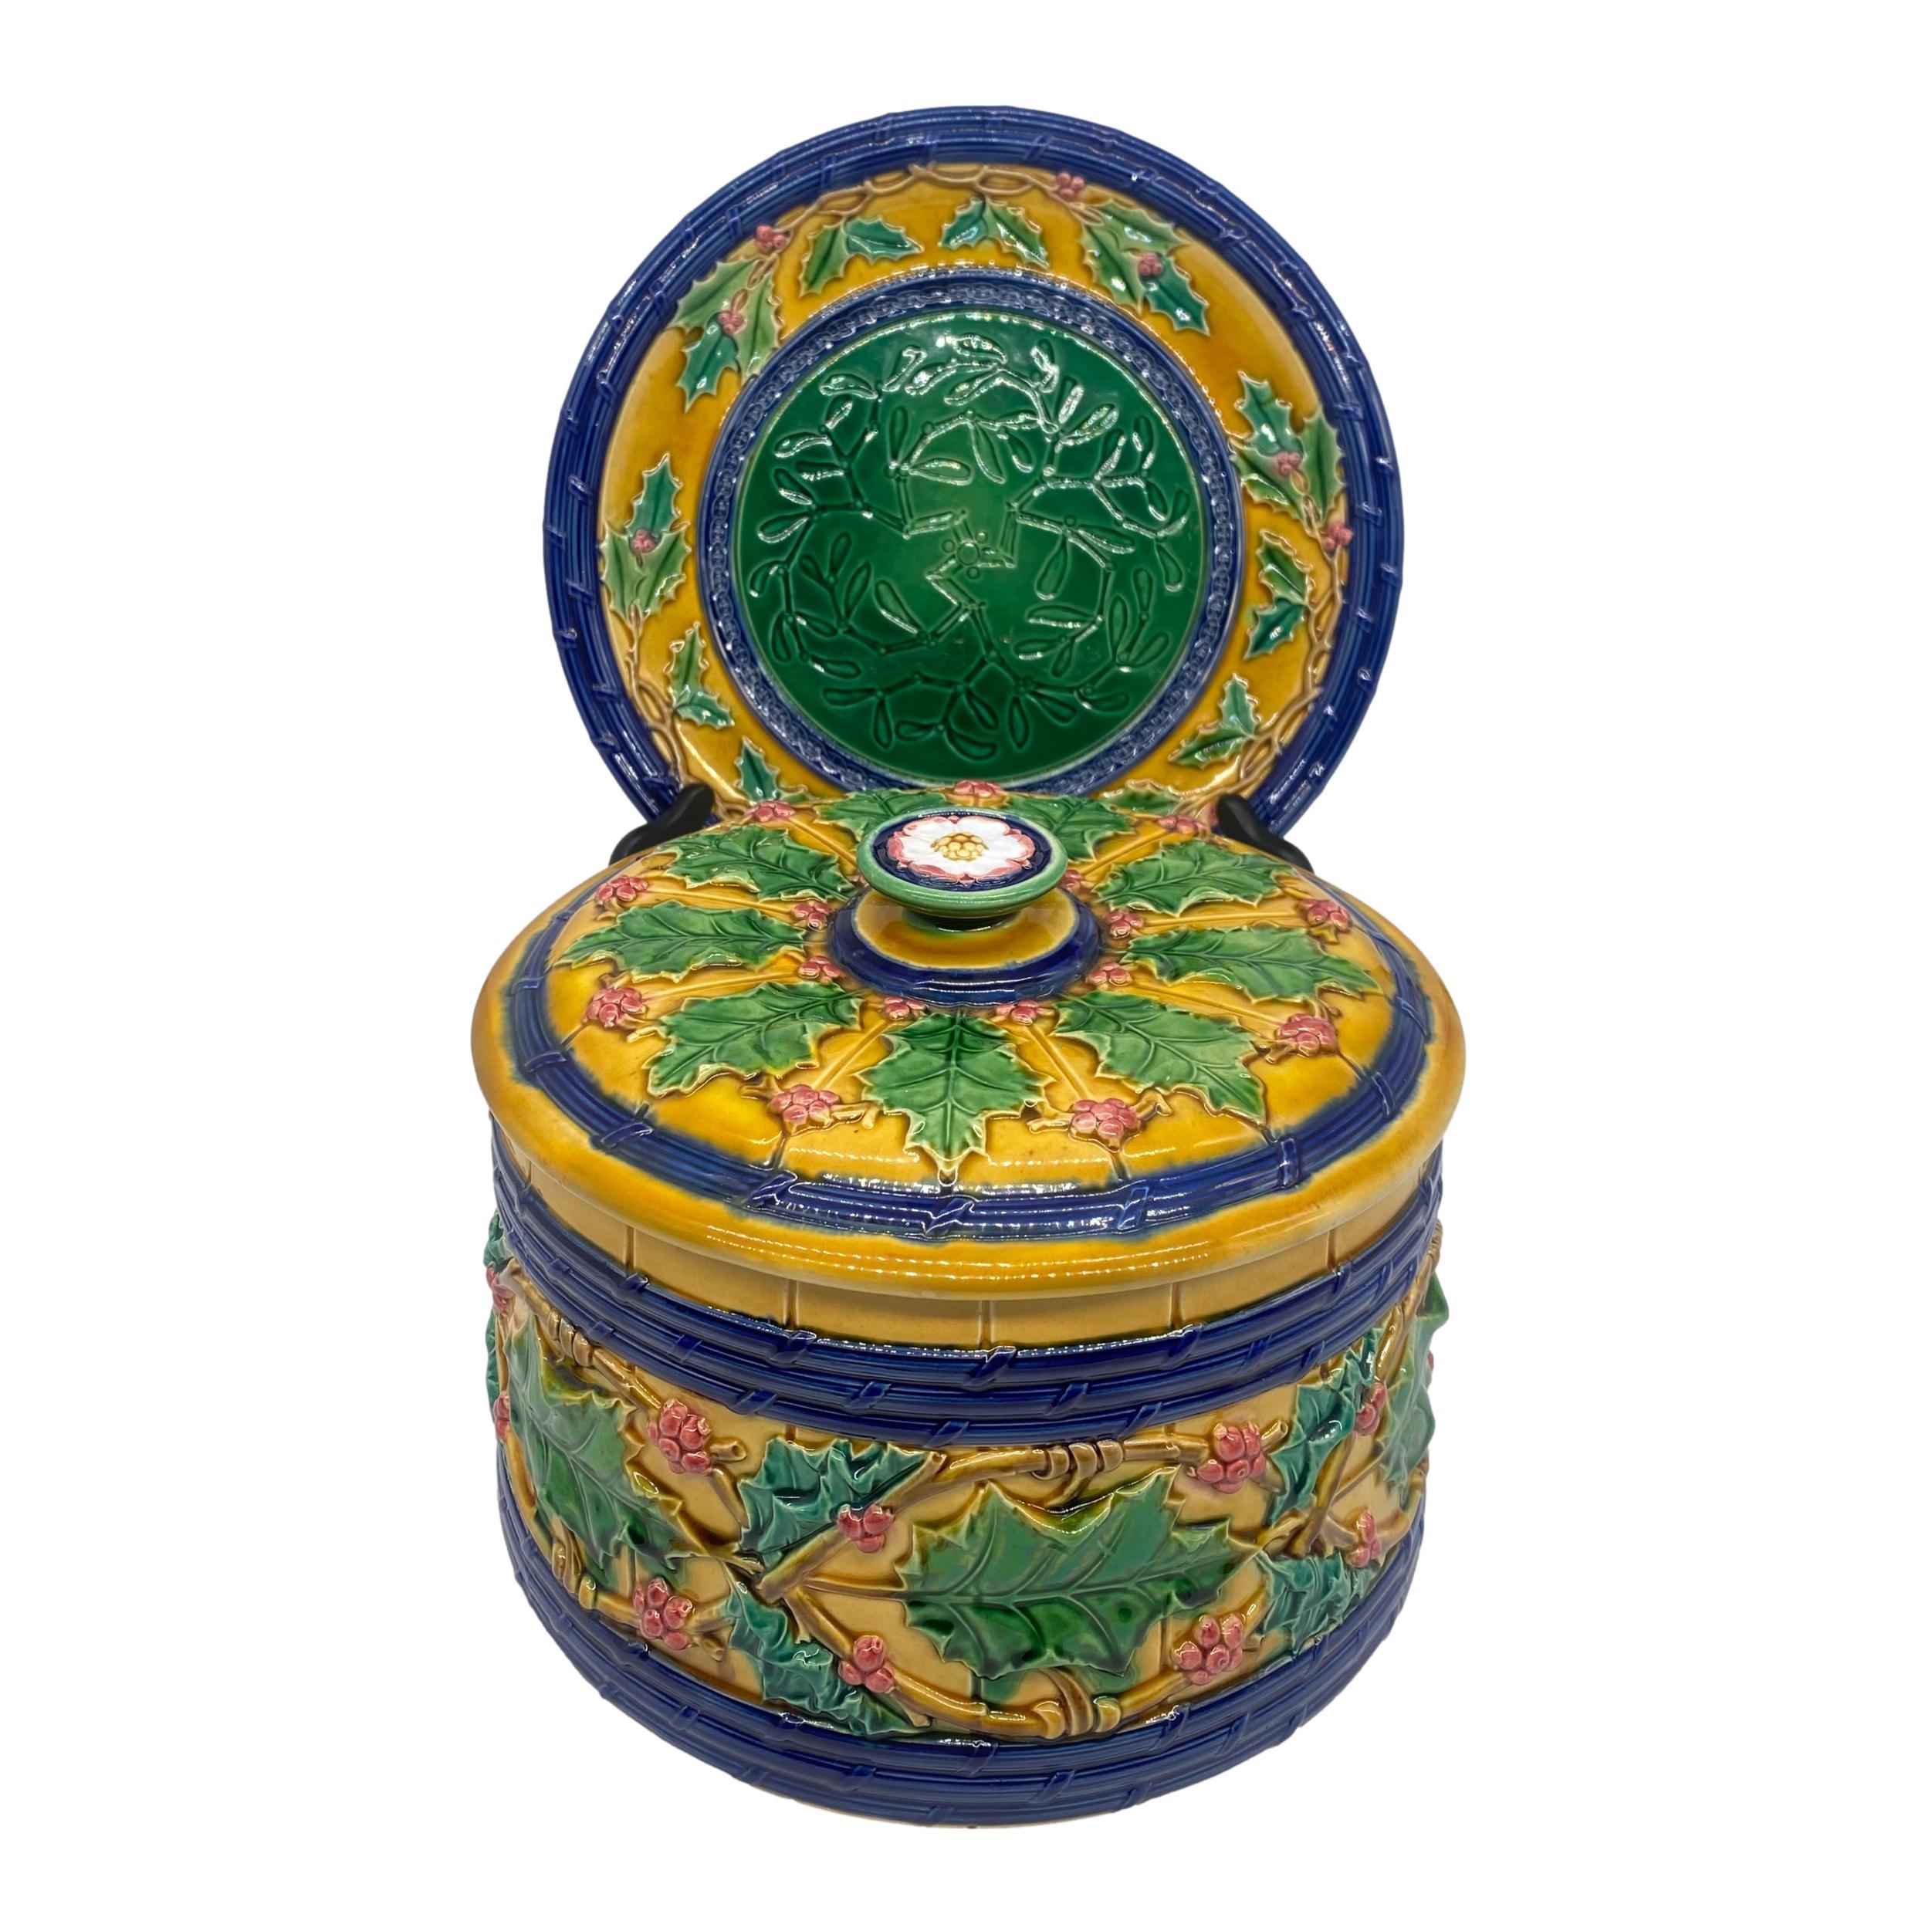 https://a.1stdibscdn.com/a-minton-majolica-christmas-tureen-cover-and-stand-english-dated-1867-for-sale-picture-2/f_13022/f_376506921703271777009/IMG_7528_clipped_rev_2_master.jpeg